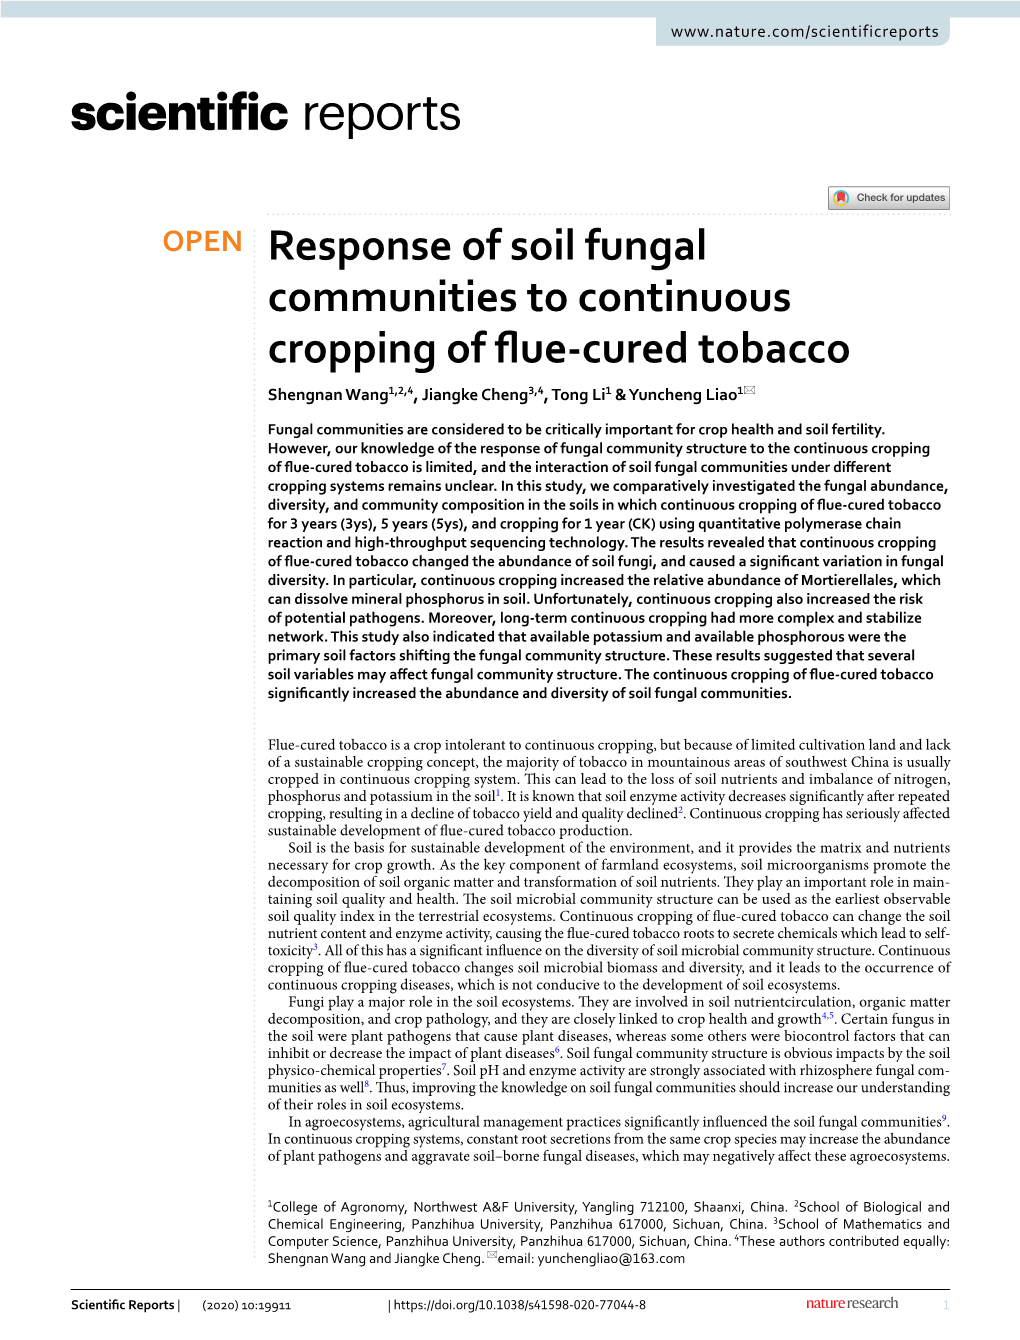 Response of Soil Fungal Communities to Continuous Cropping of Flue-Cured